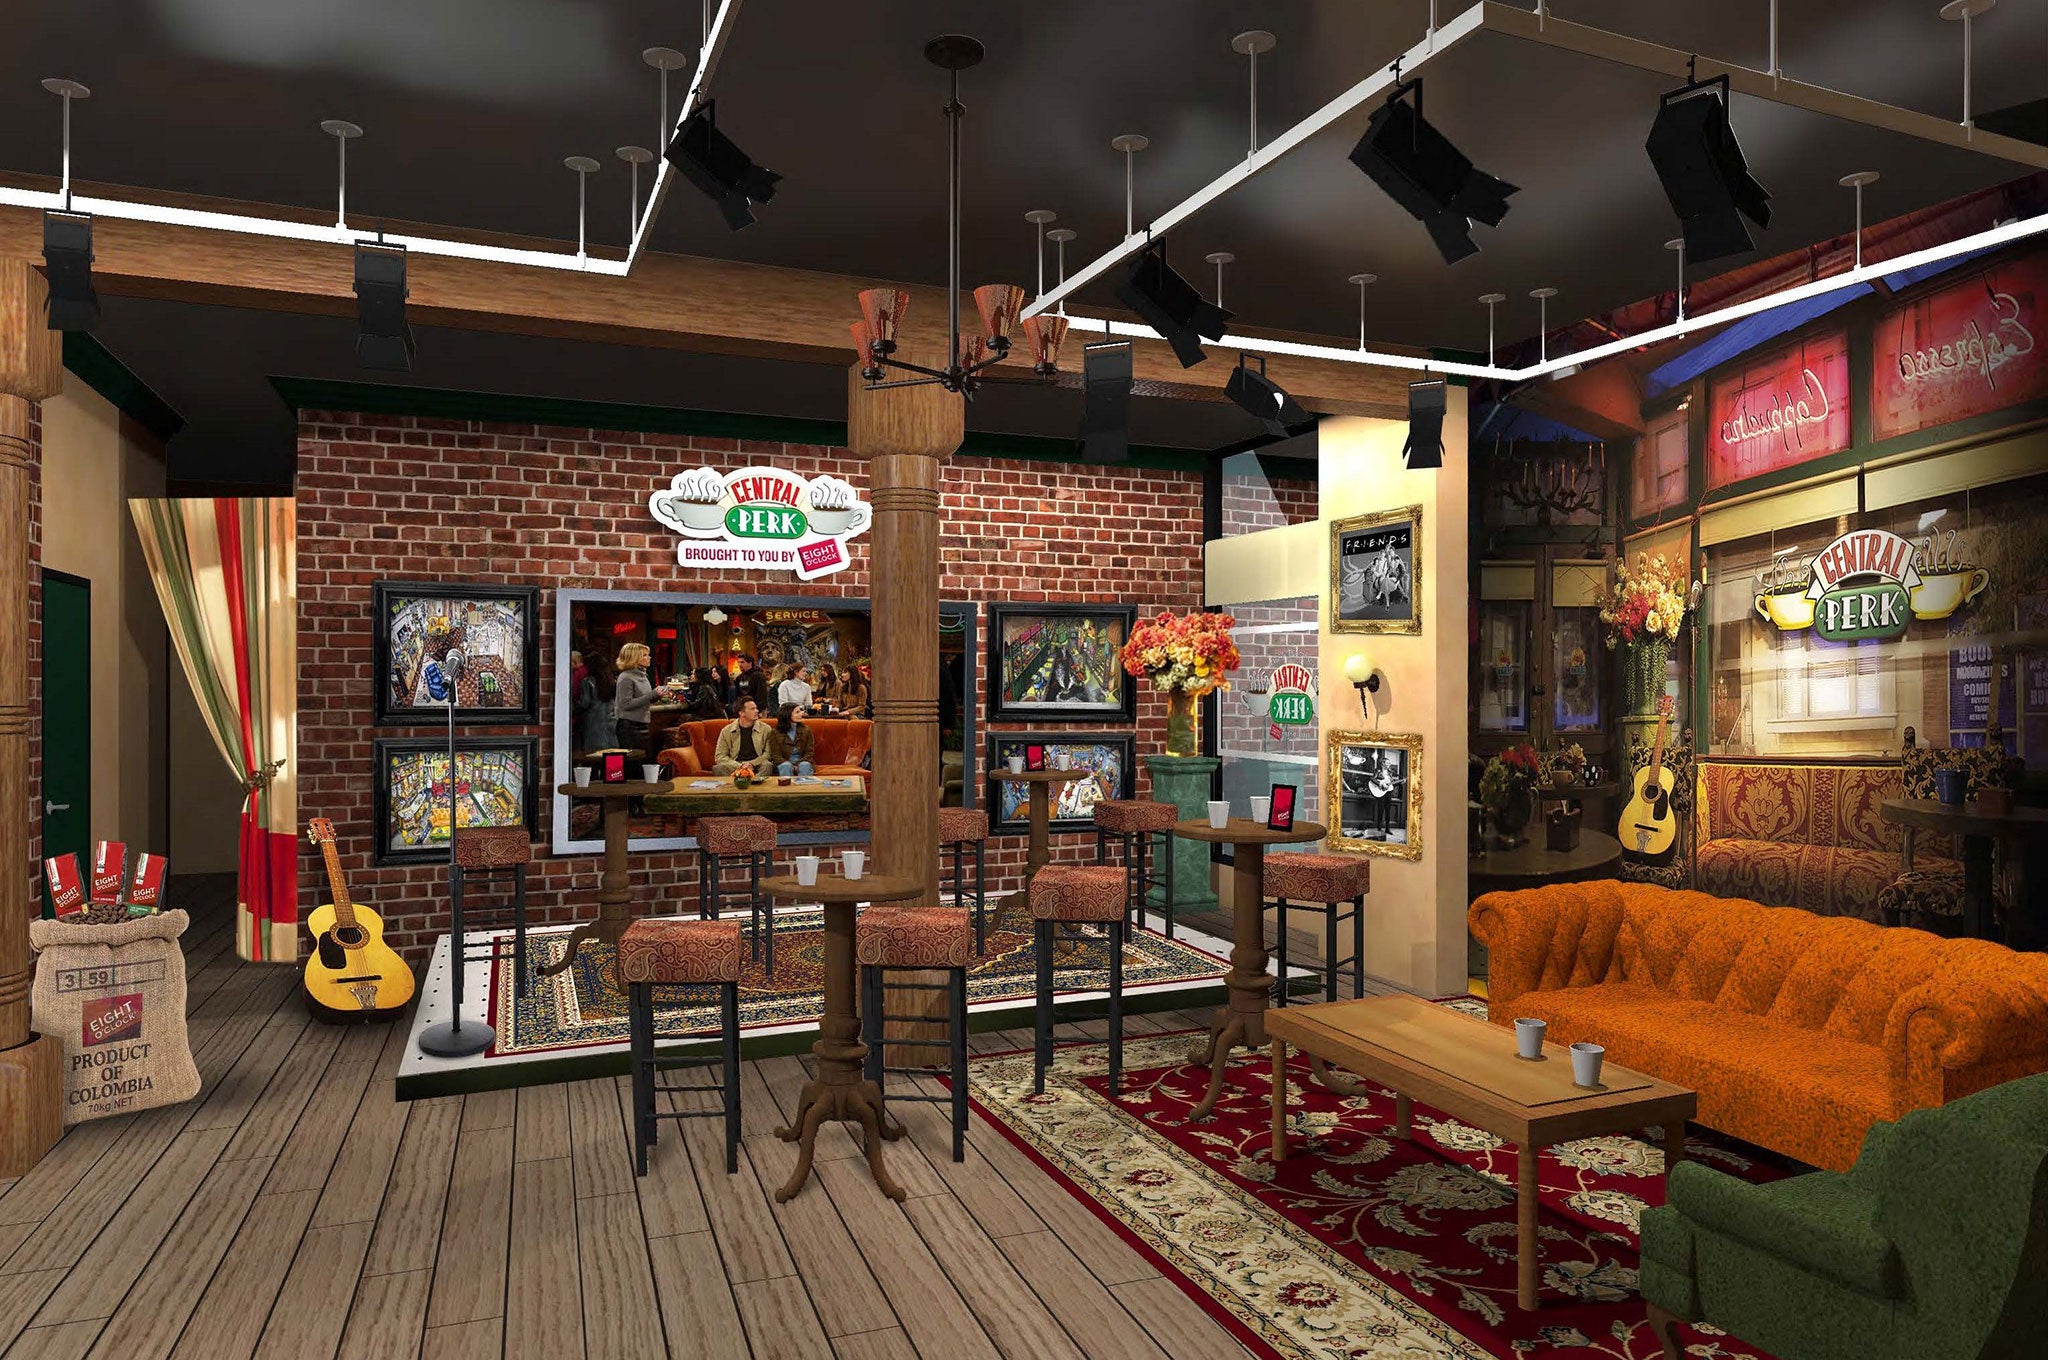 To mark the anniversary of the phenomenally successful sitcom, fans can visit a replica of Friends hangout Central Perk in Manhattan, order a free drink and kick back on the same orange sofa used on the set